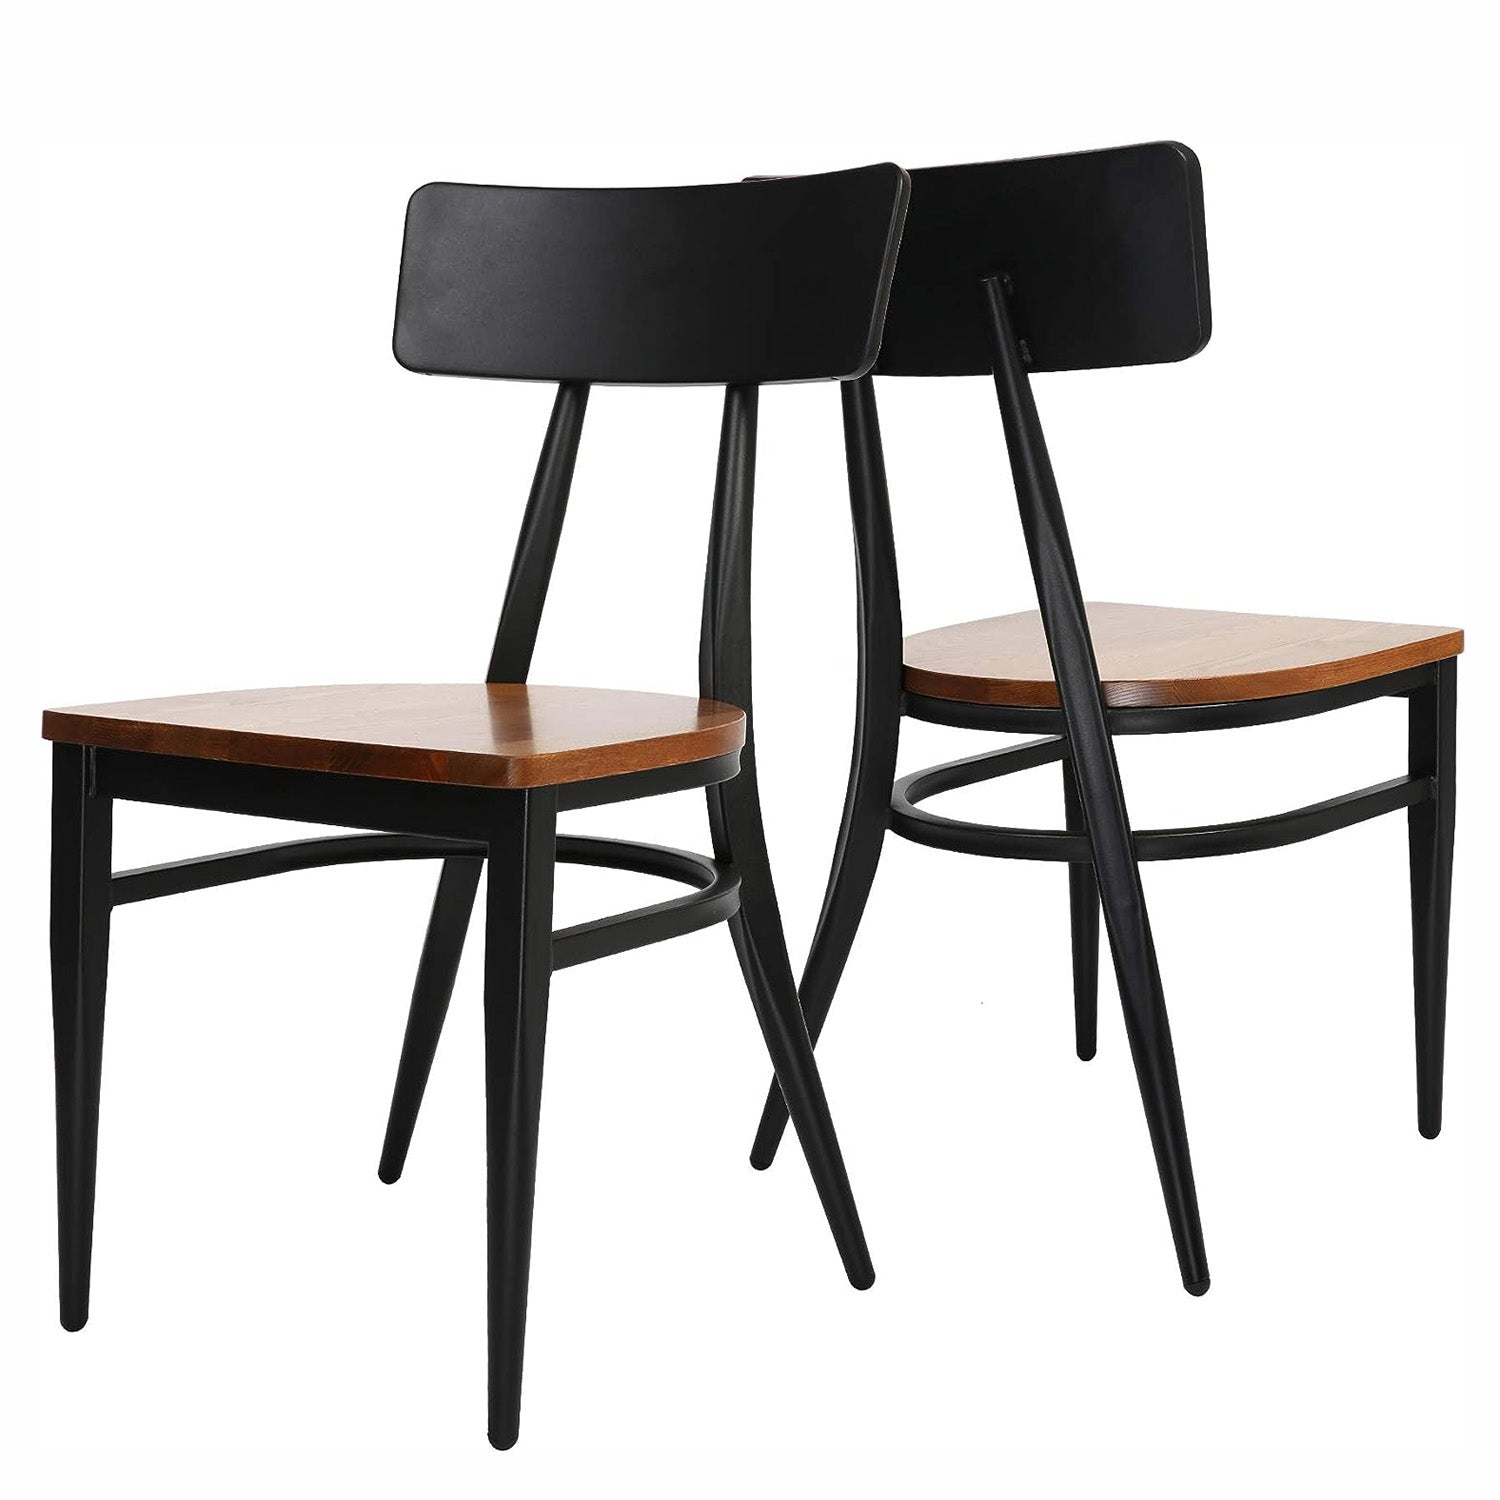 Set of 2 Kitchen Dining Chairs Wood Seat with Simple Back Metal Legs, π Back Black